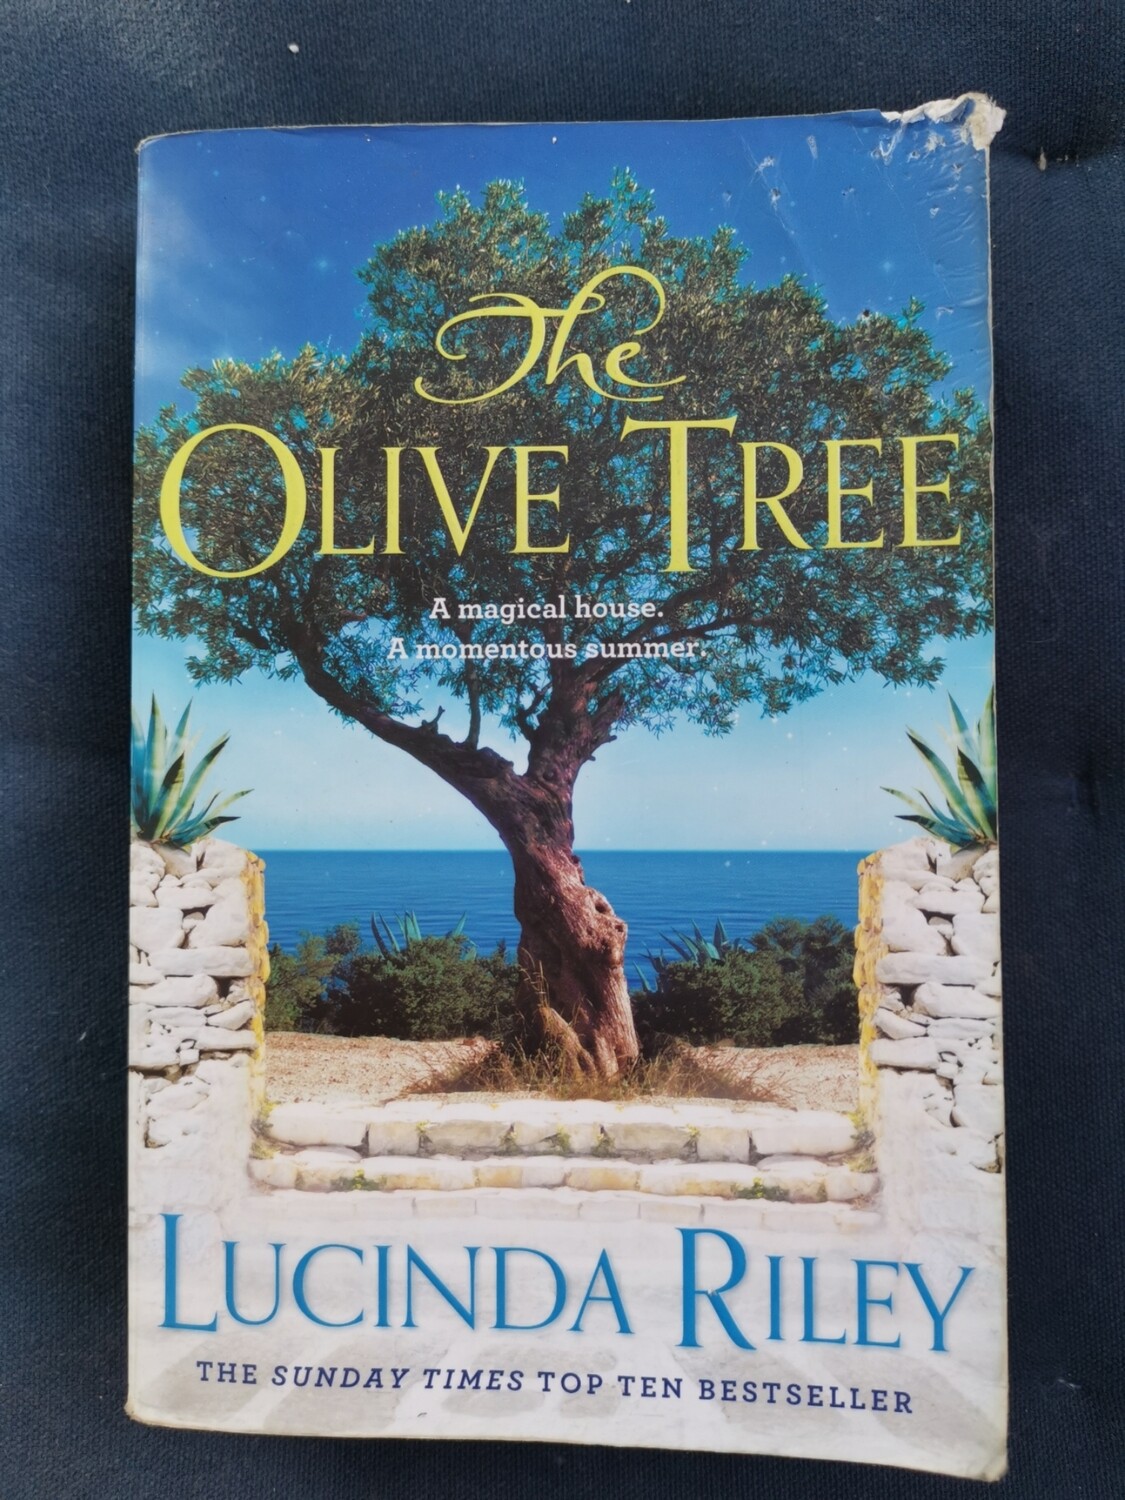 The Olive tree, Lucinda Riley